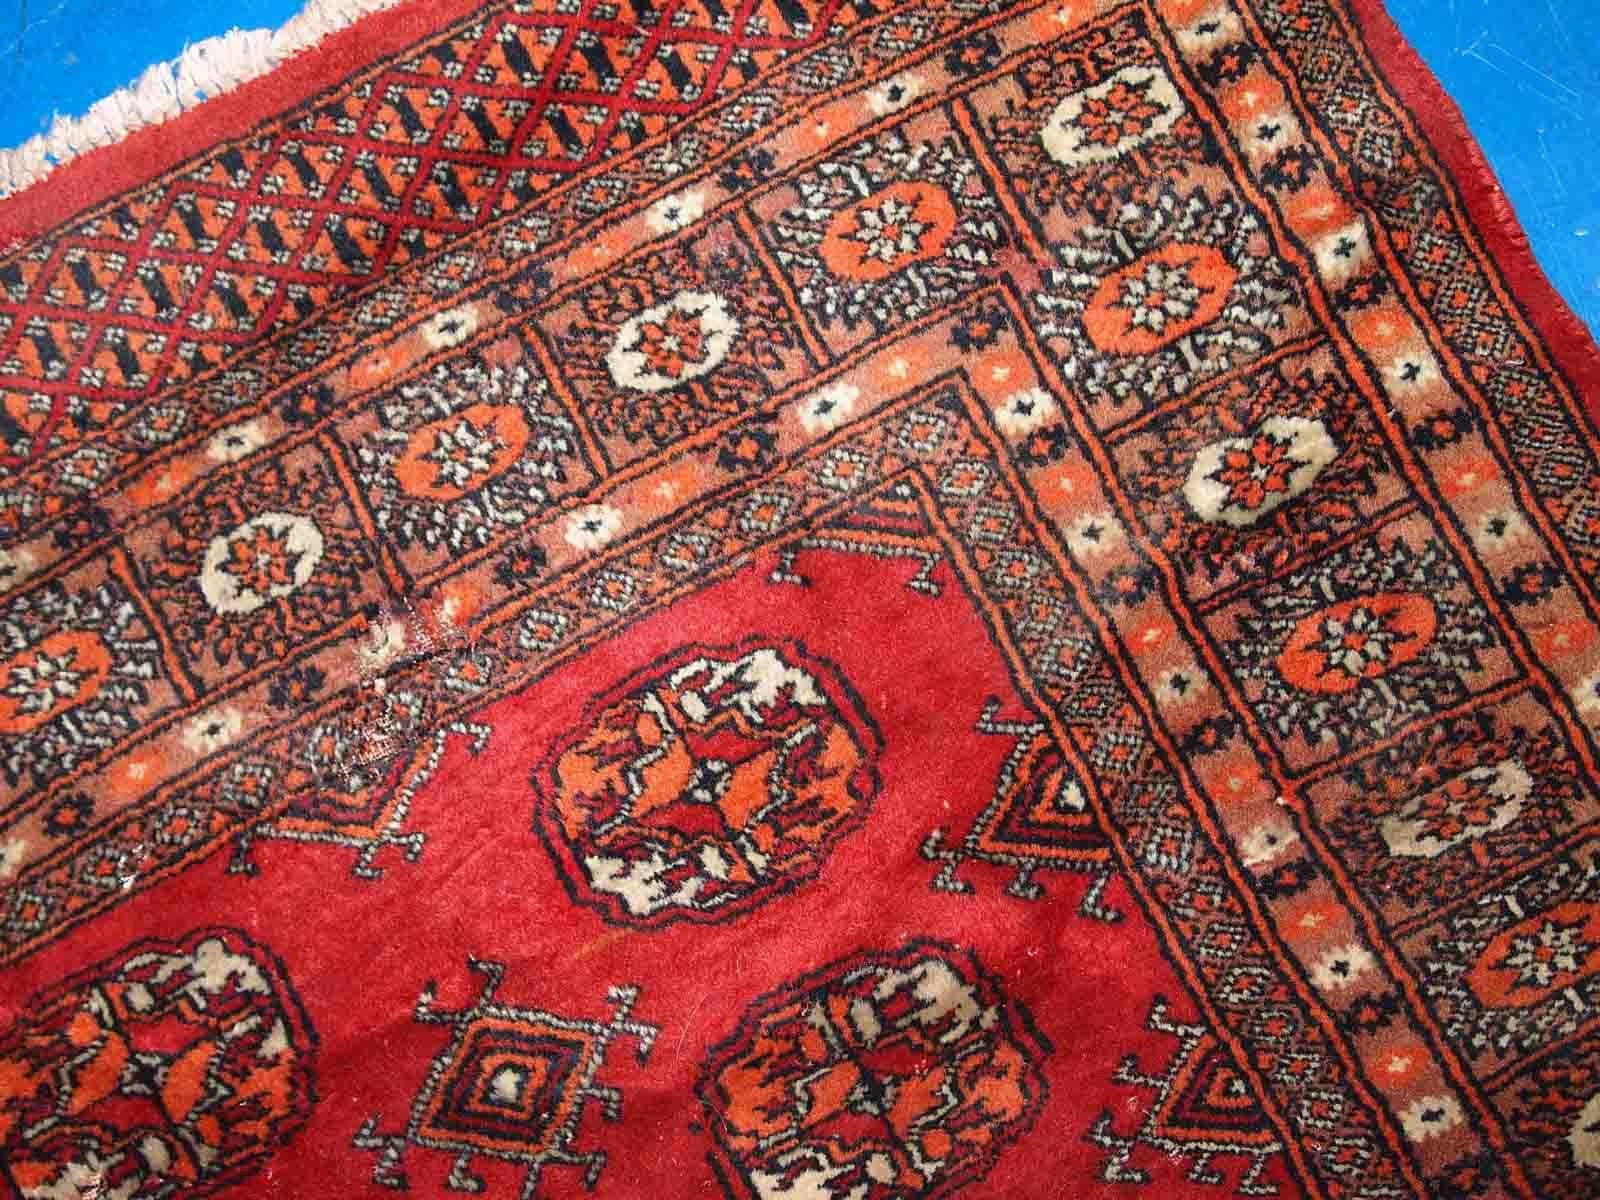 Vintage handmade Central Asian rug from Uzbekistan. The rug is in original good condition from the end of 20th century, it has minimal signs of age. It has been made from red wool and in classic Bukhara design.

-condition: original good, minimal